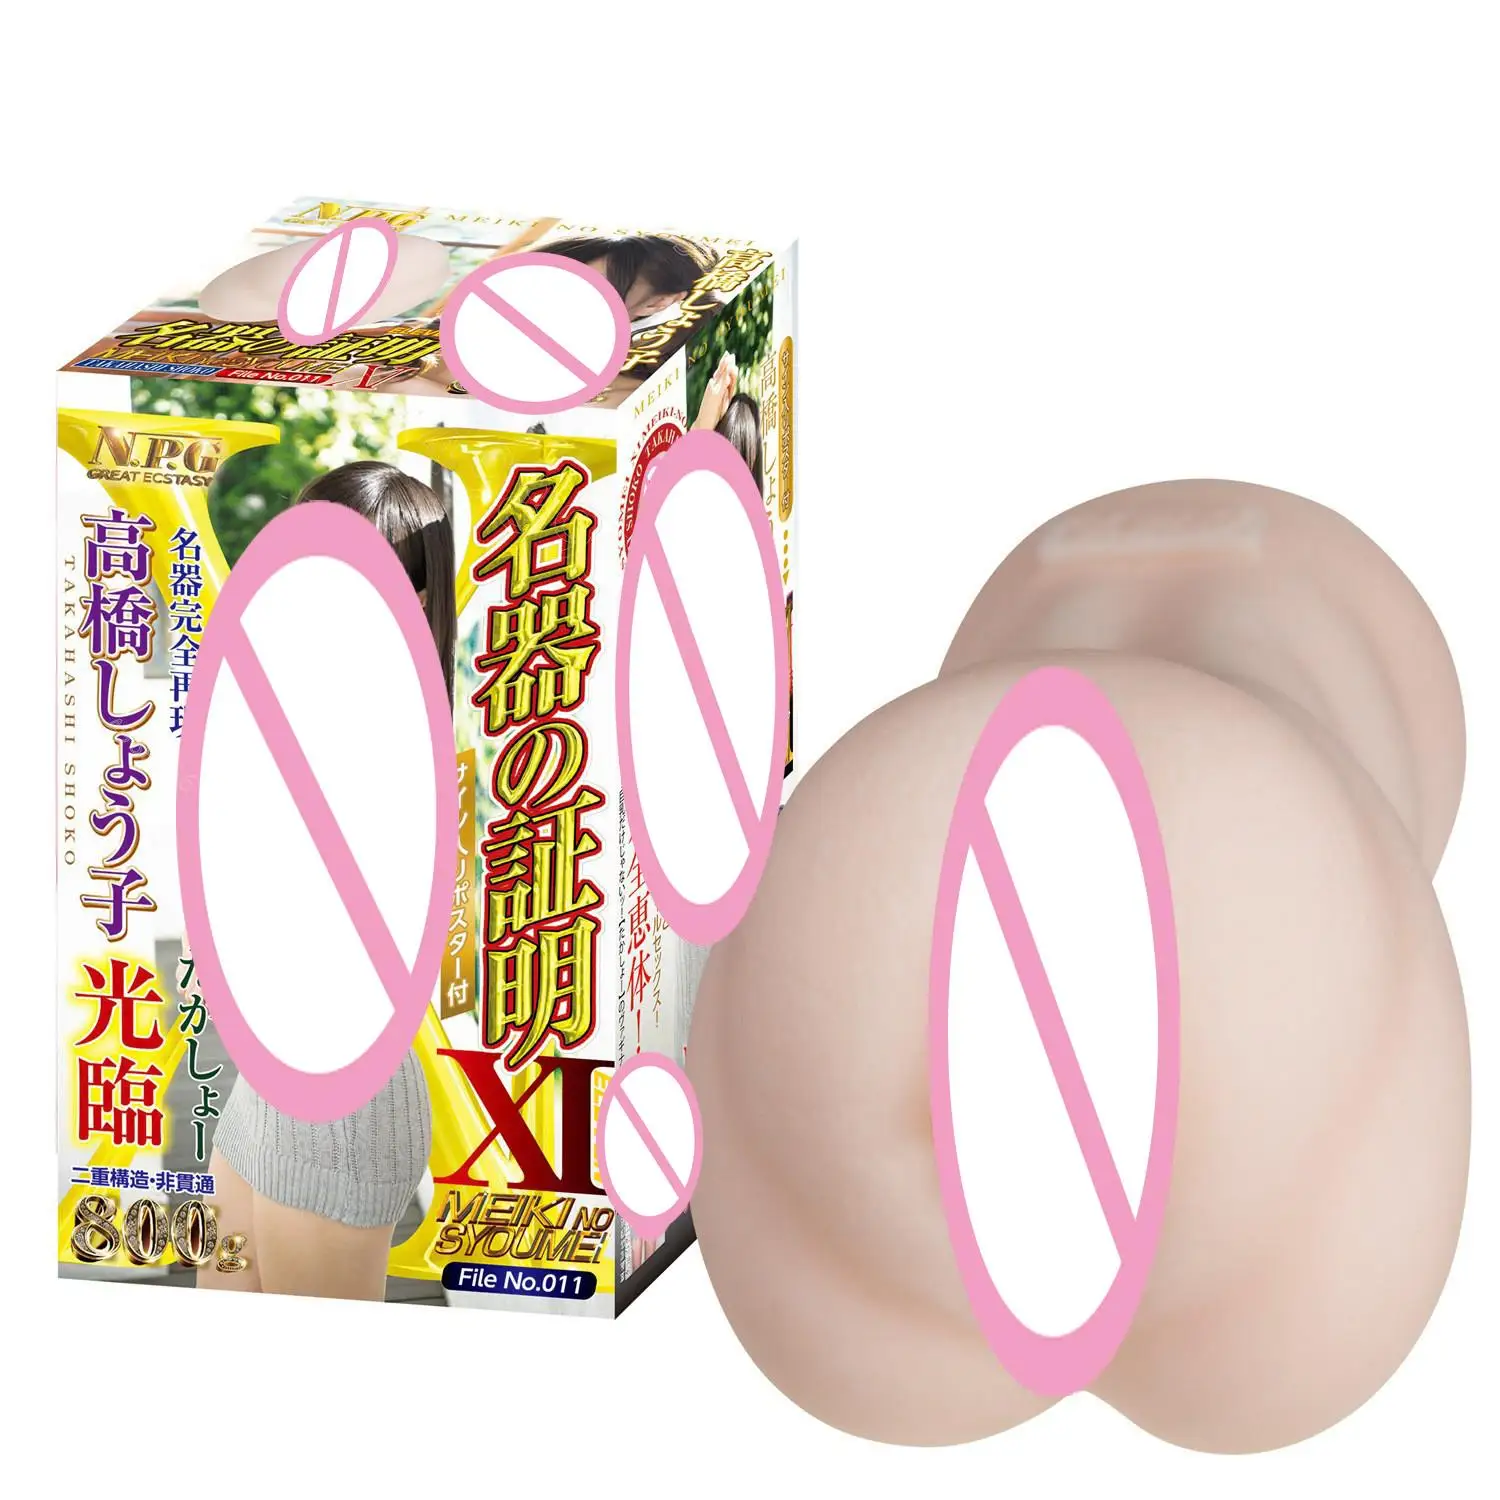 

Japan Imported NPG Realistic Pocket Pussy 18+ Male Masturbator Cup dildos No Syoumei 11 Sex Toys for Men Artificial Vagina